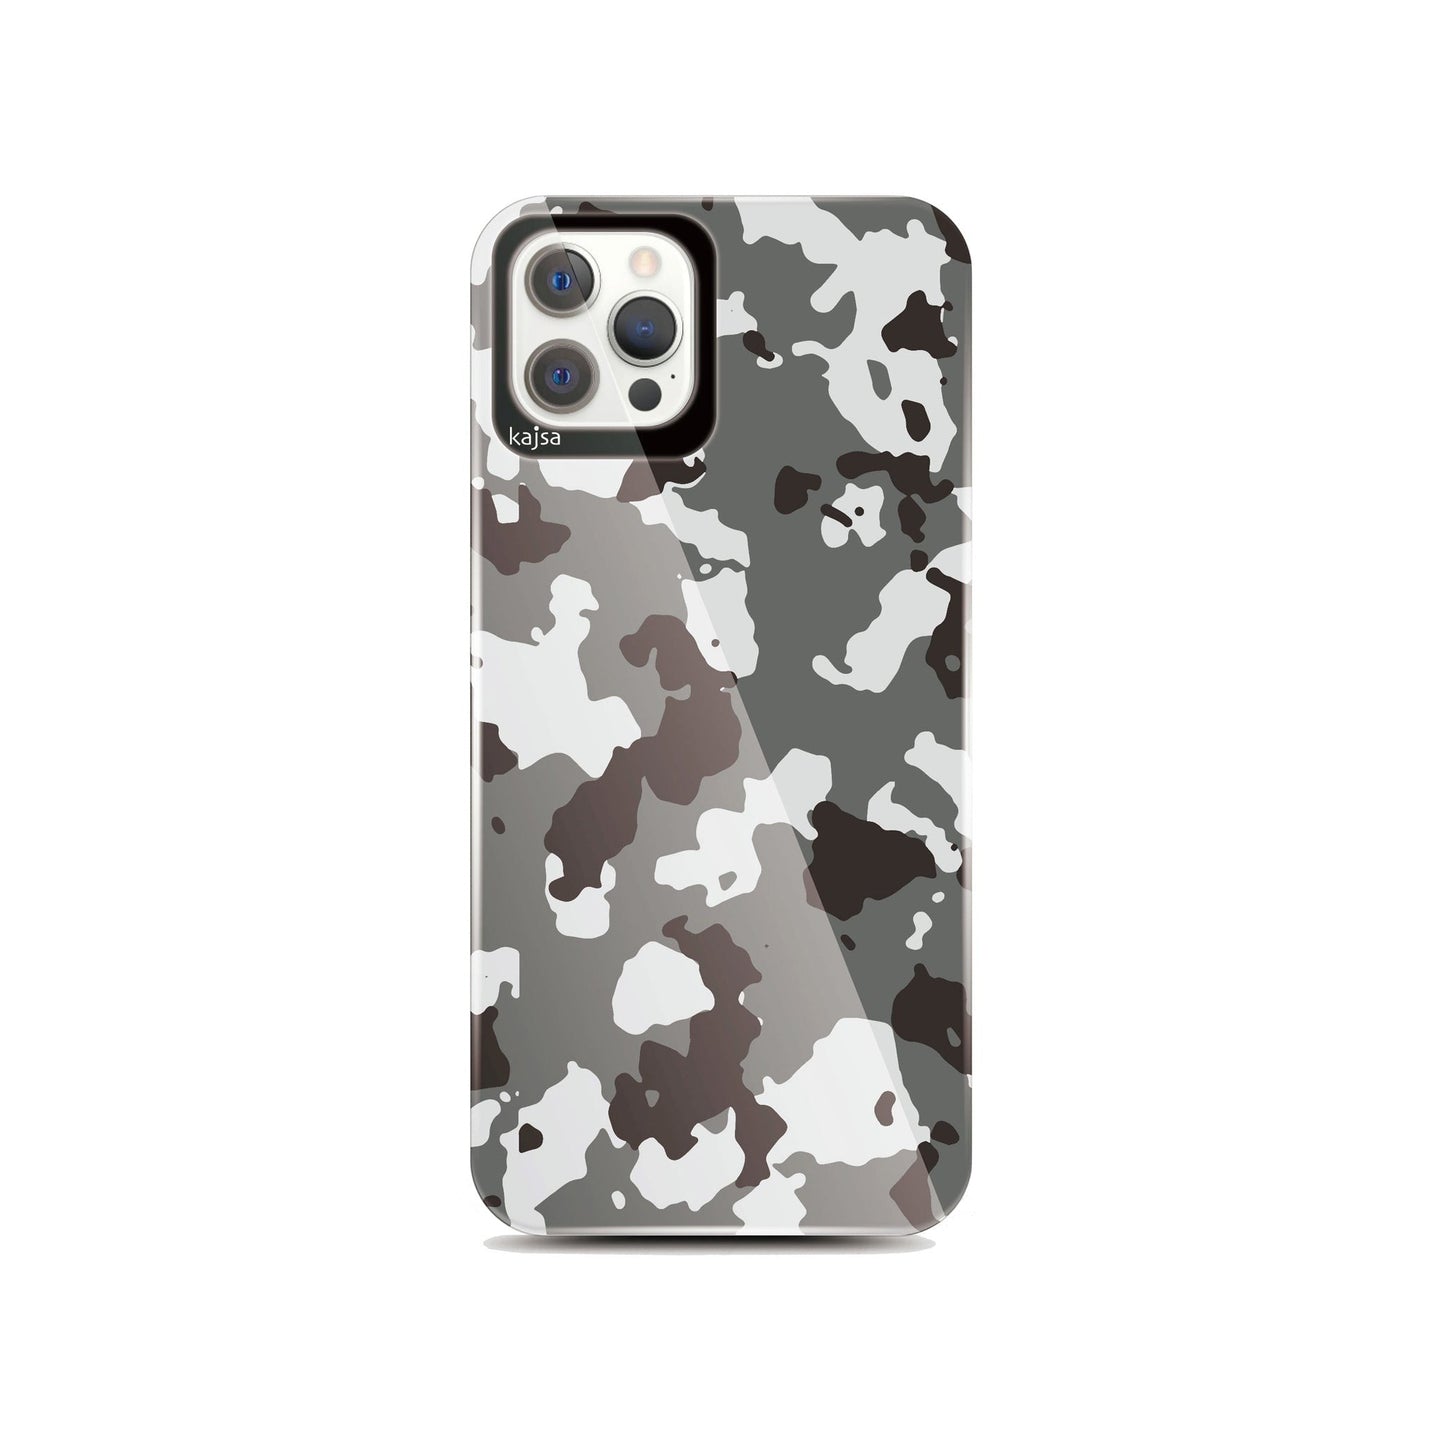 Camouflage Cover For Iphone